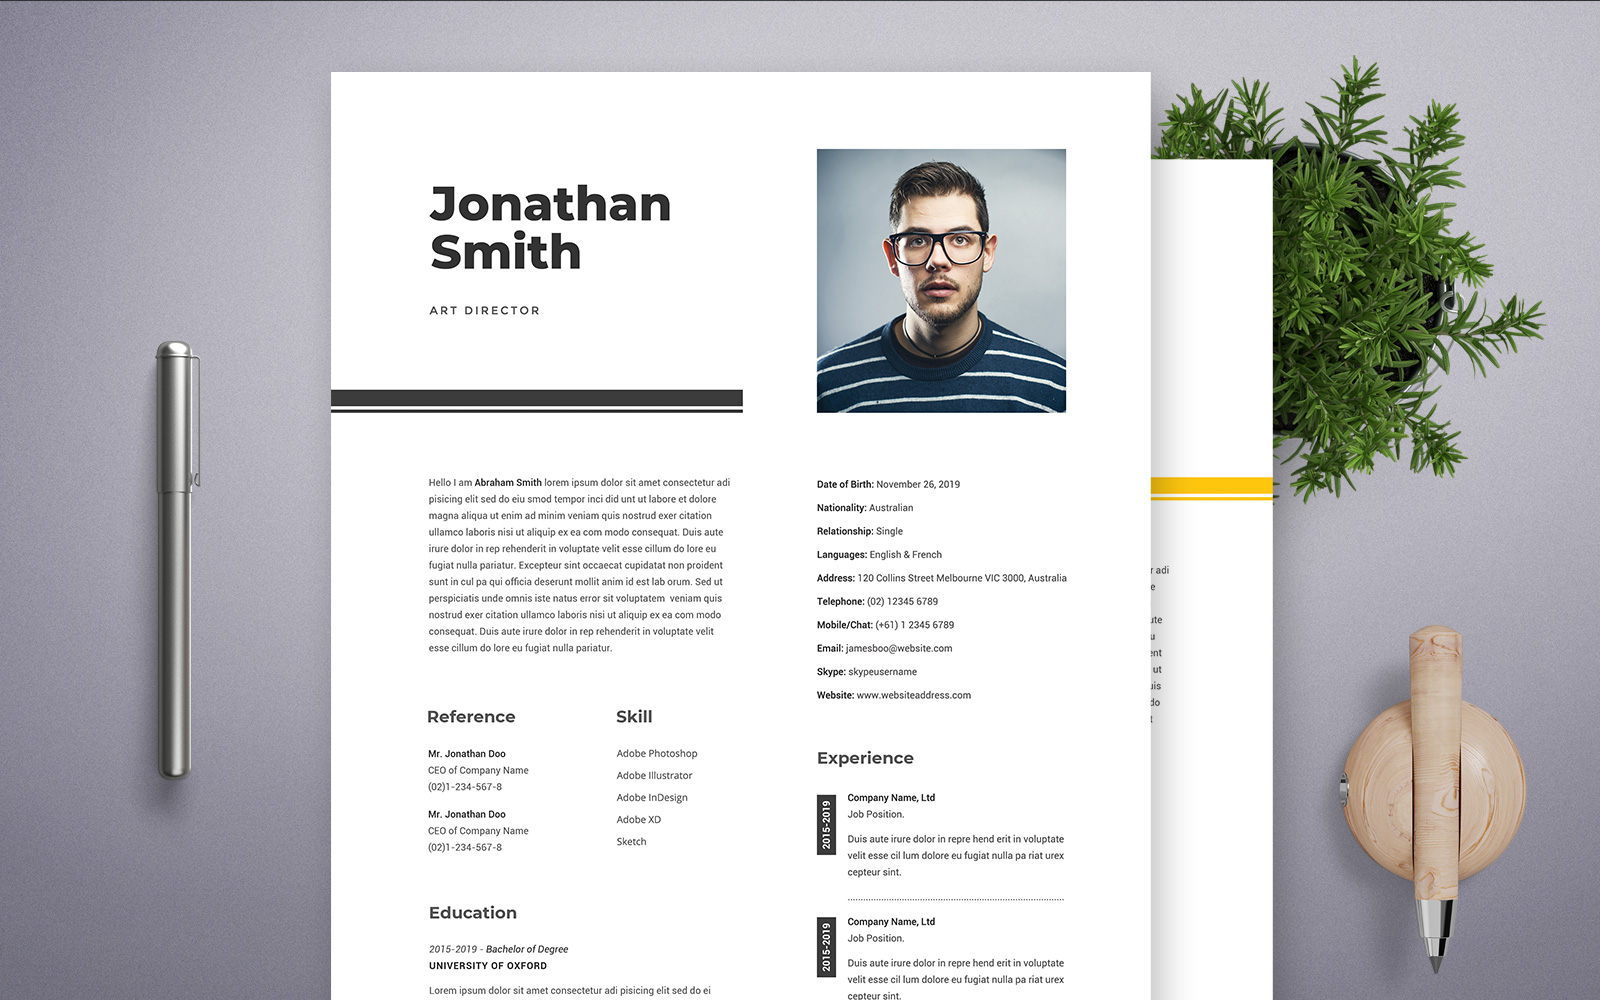 Jonathan Smith | Art Director Professional and Clean Resume Template